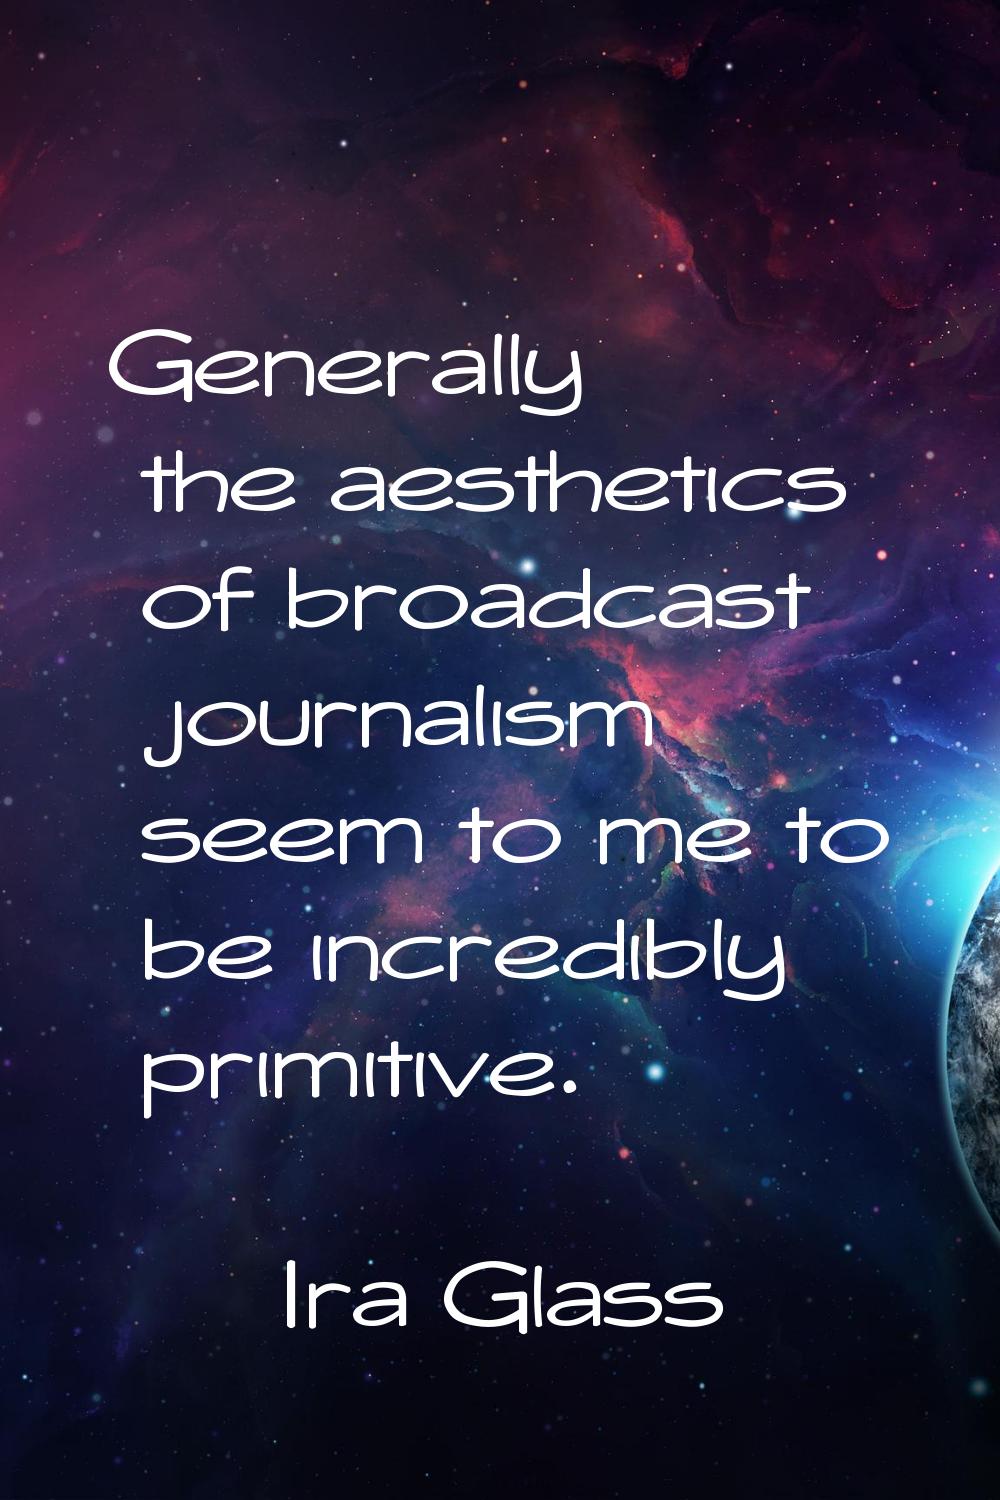 Generally the aesthetics of broadcast journalism seem to me to be incredibly primitive.